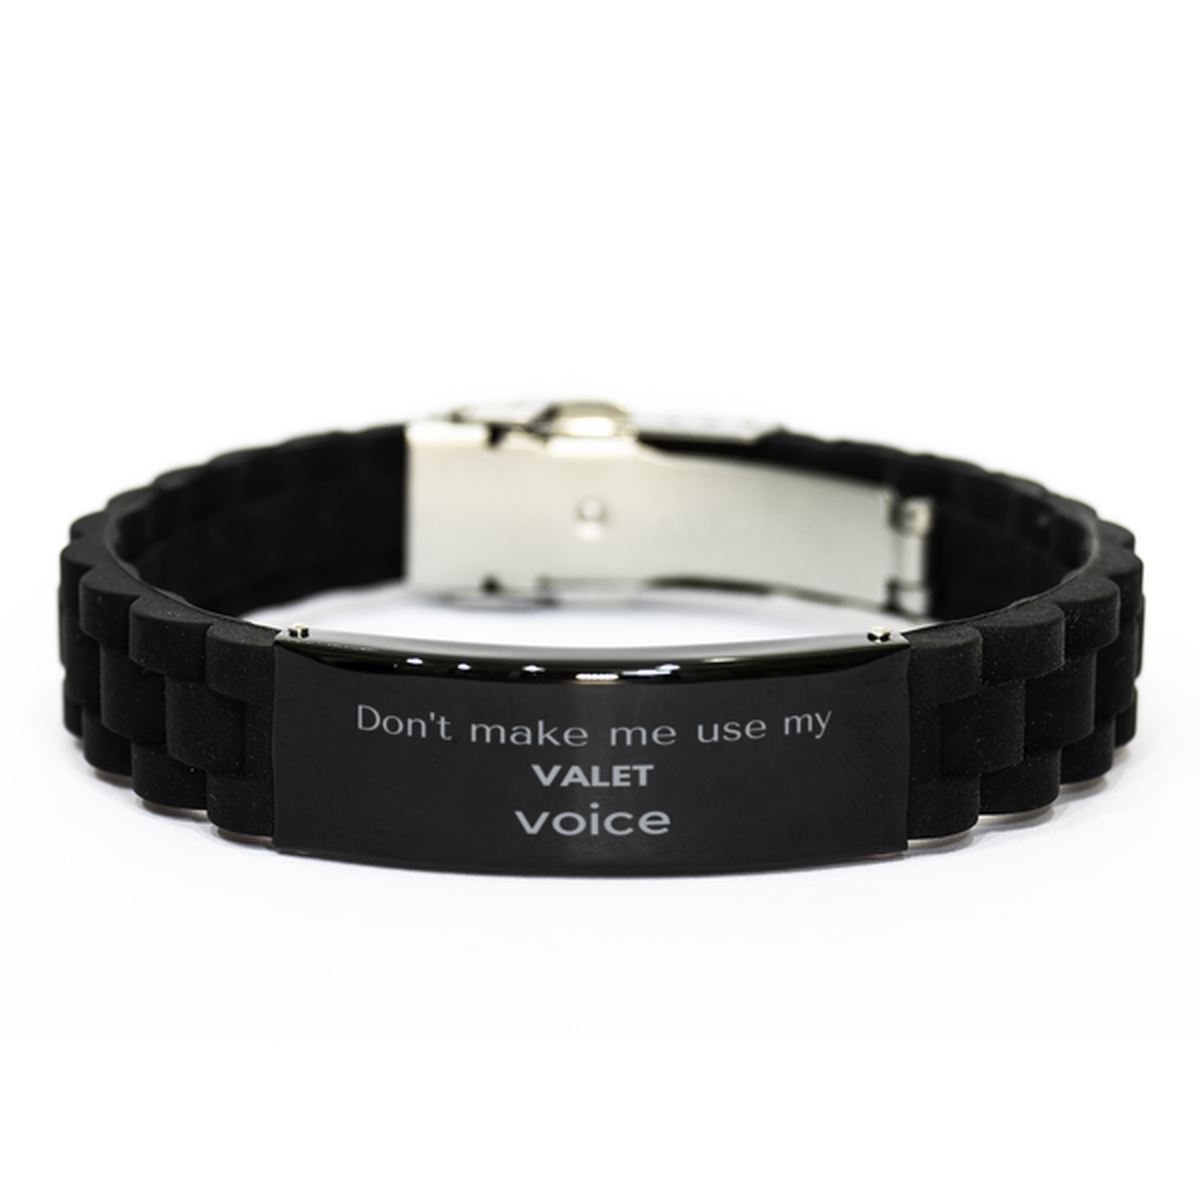 Don't make me use my Valet voice, Sarcasm Valet Gifts, Christmas Valet Black Glidelock Clasp Bracelet Birthday Unique Gifts For Valet Coworkers, Men, Women, Colleague, Friends